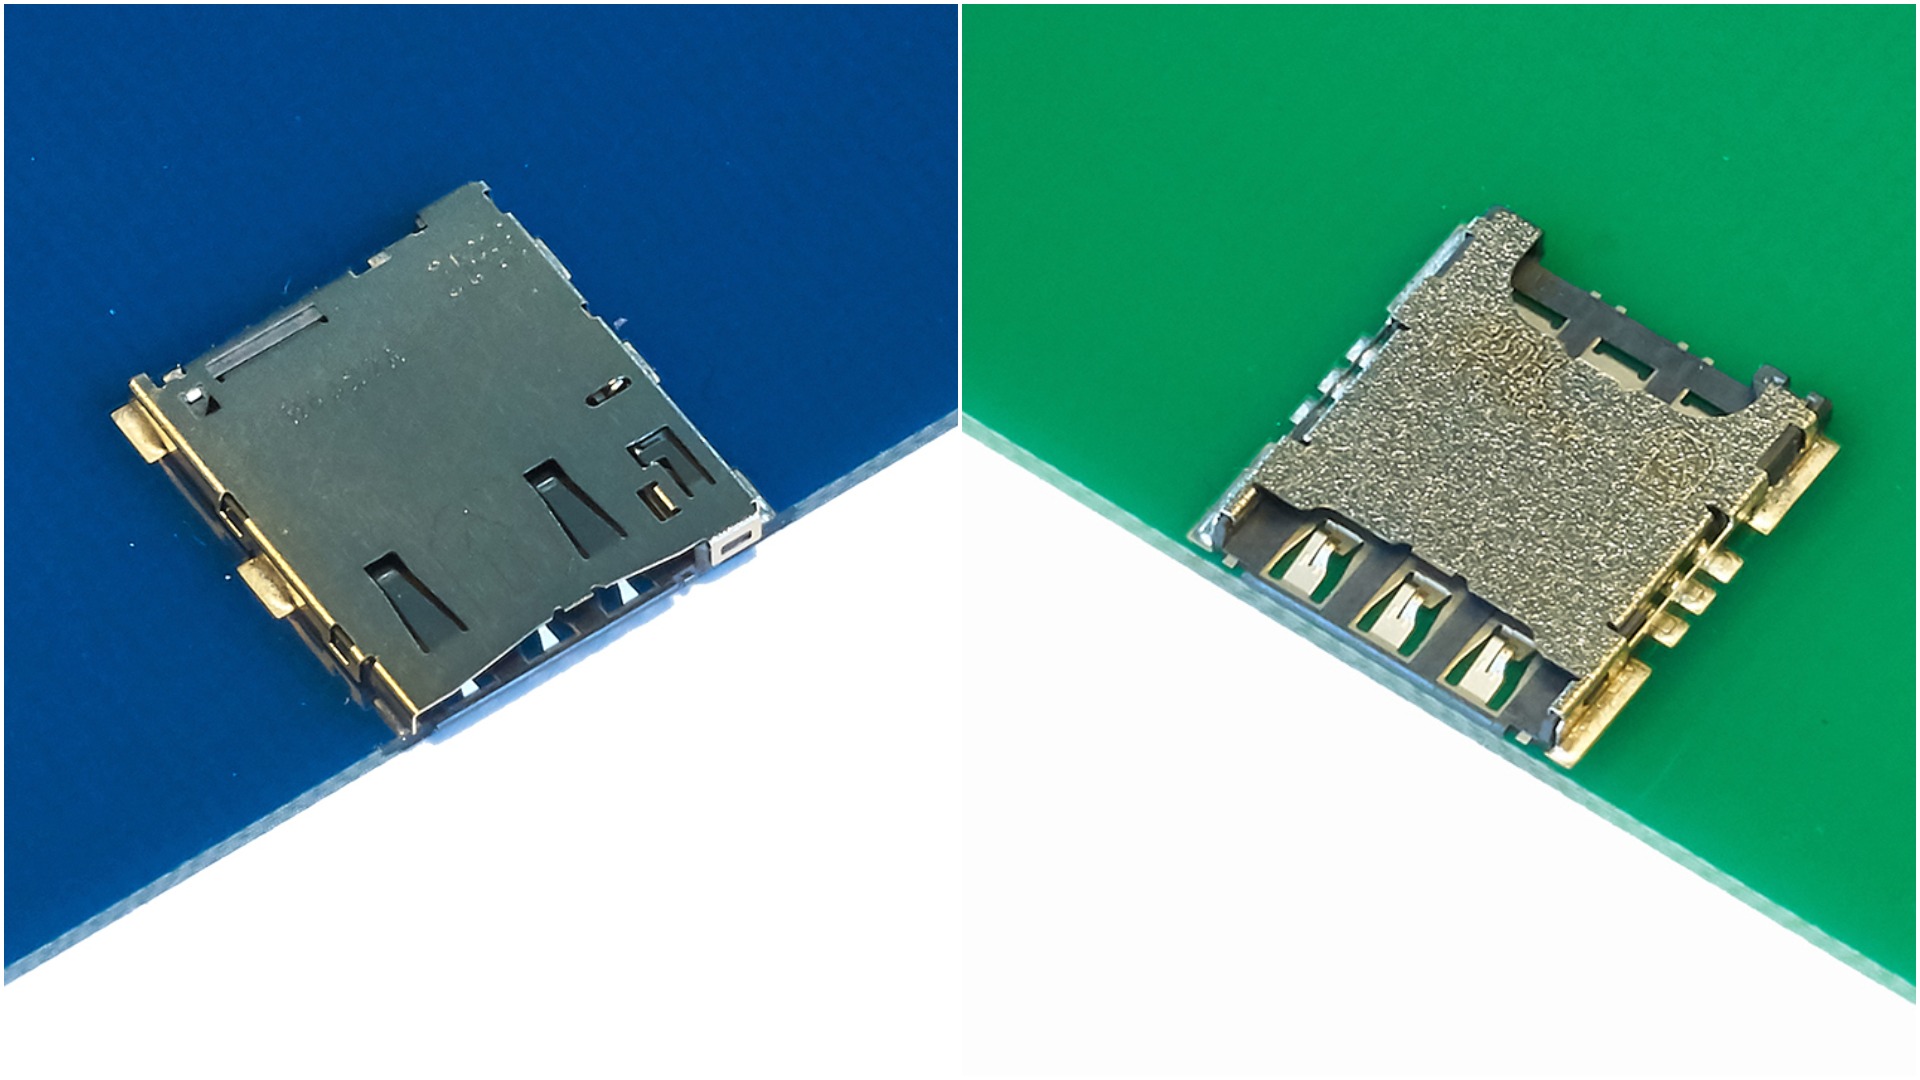 January 2020 New Connectivity Products: Hirose's new KP13 Series Nano SIM Card Connectors